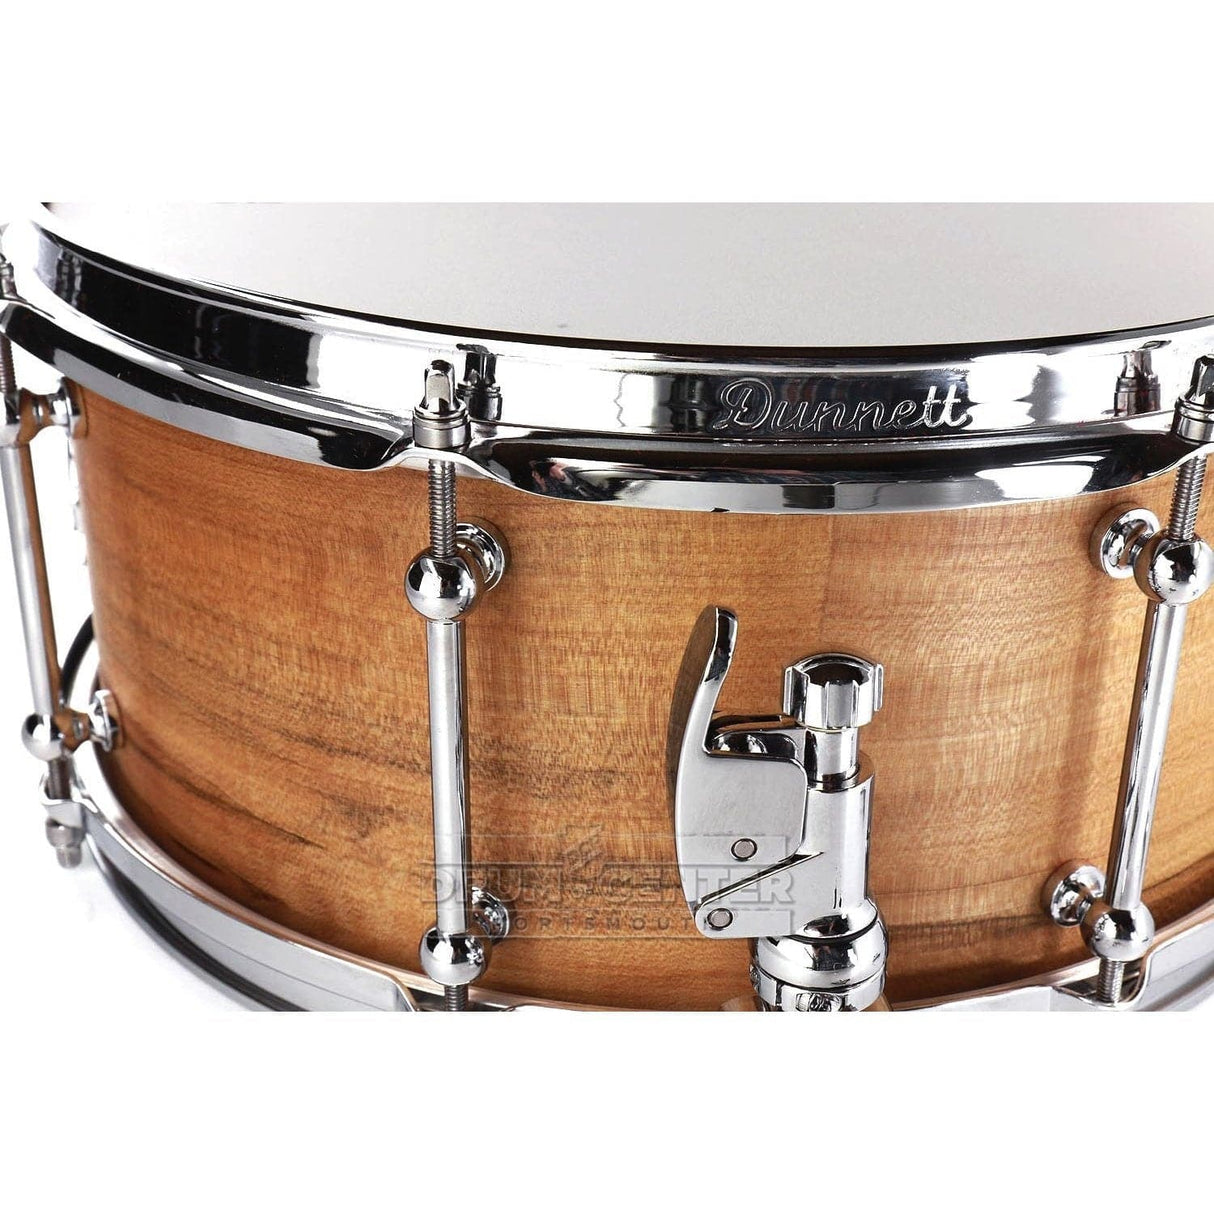 Dunnett Classic MonoPly Maple Snare Drum 14x6.5 Satin Natural